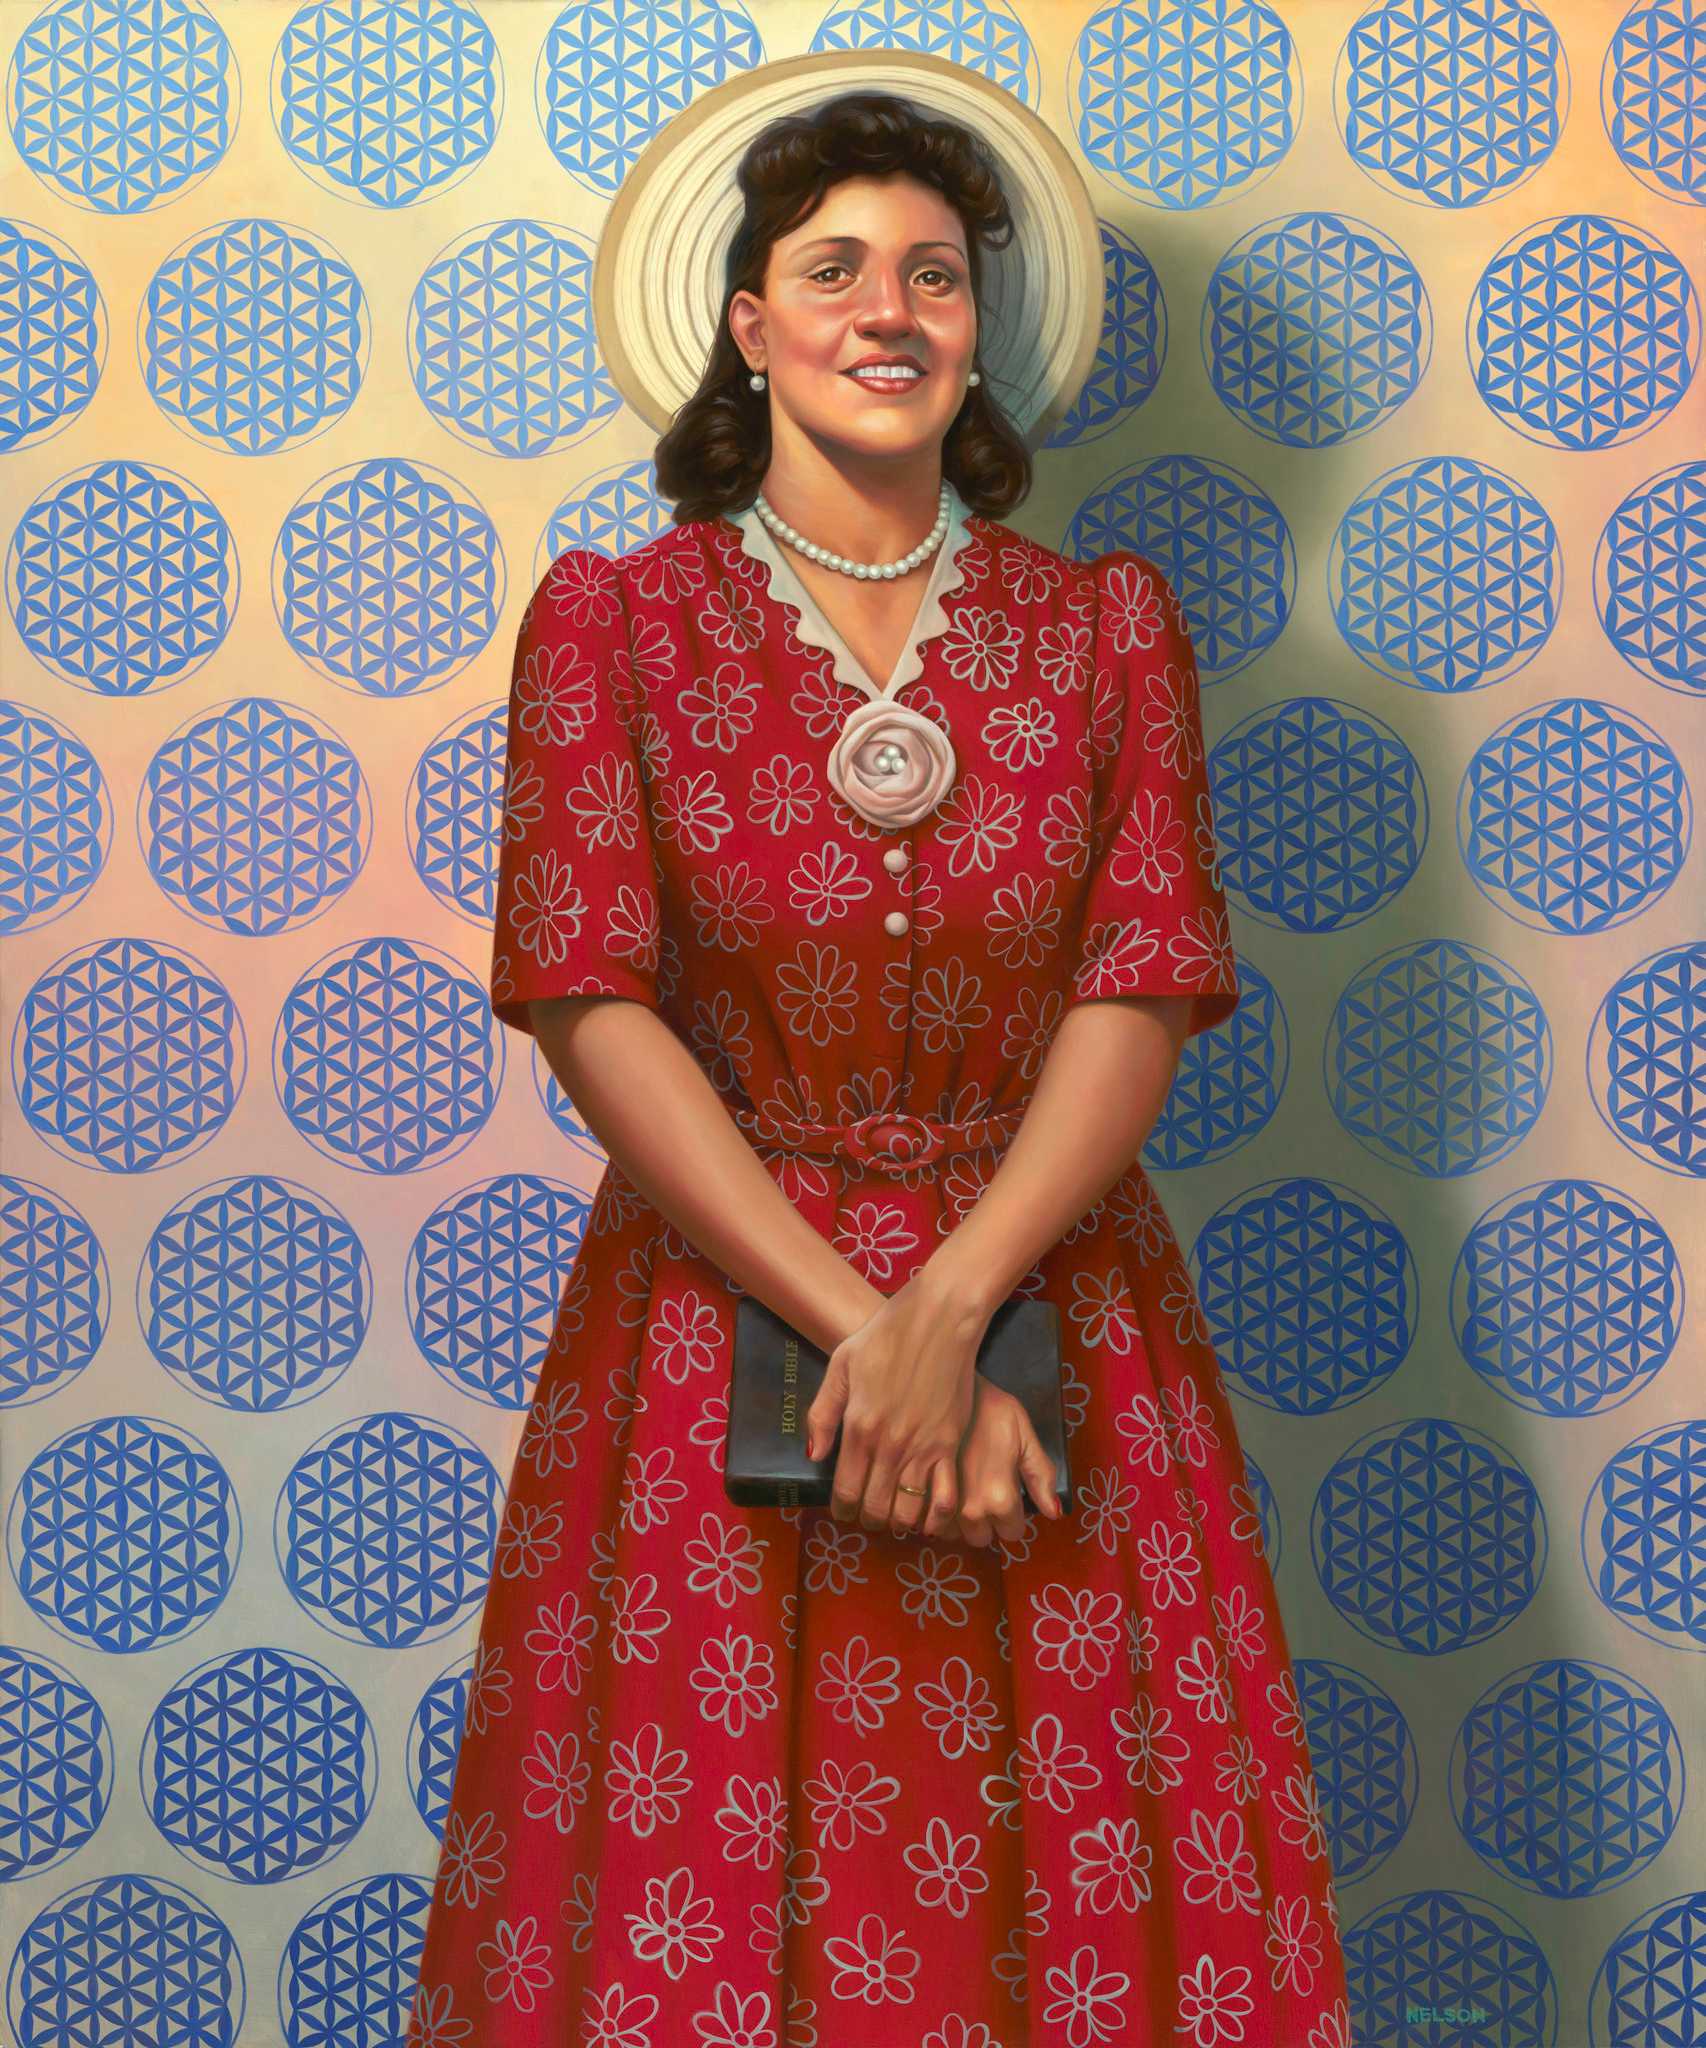 Oil colorful painting of Henrietta Lacks smiling, facing forward with her hands clasped in front of her body, in a red dress.